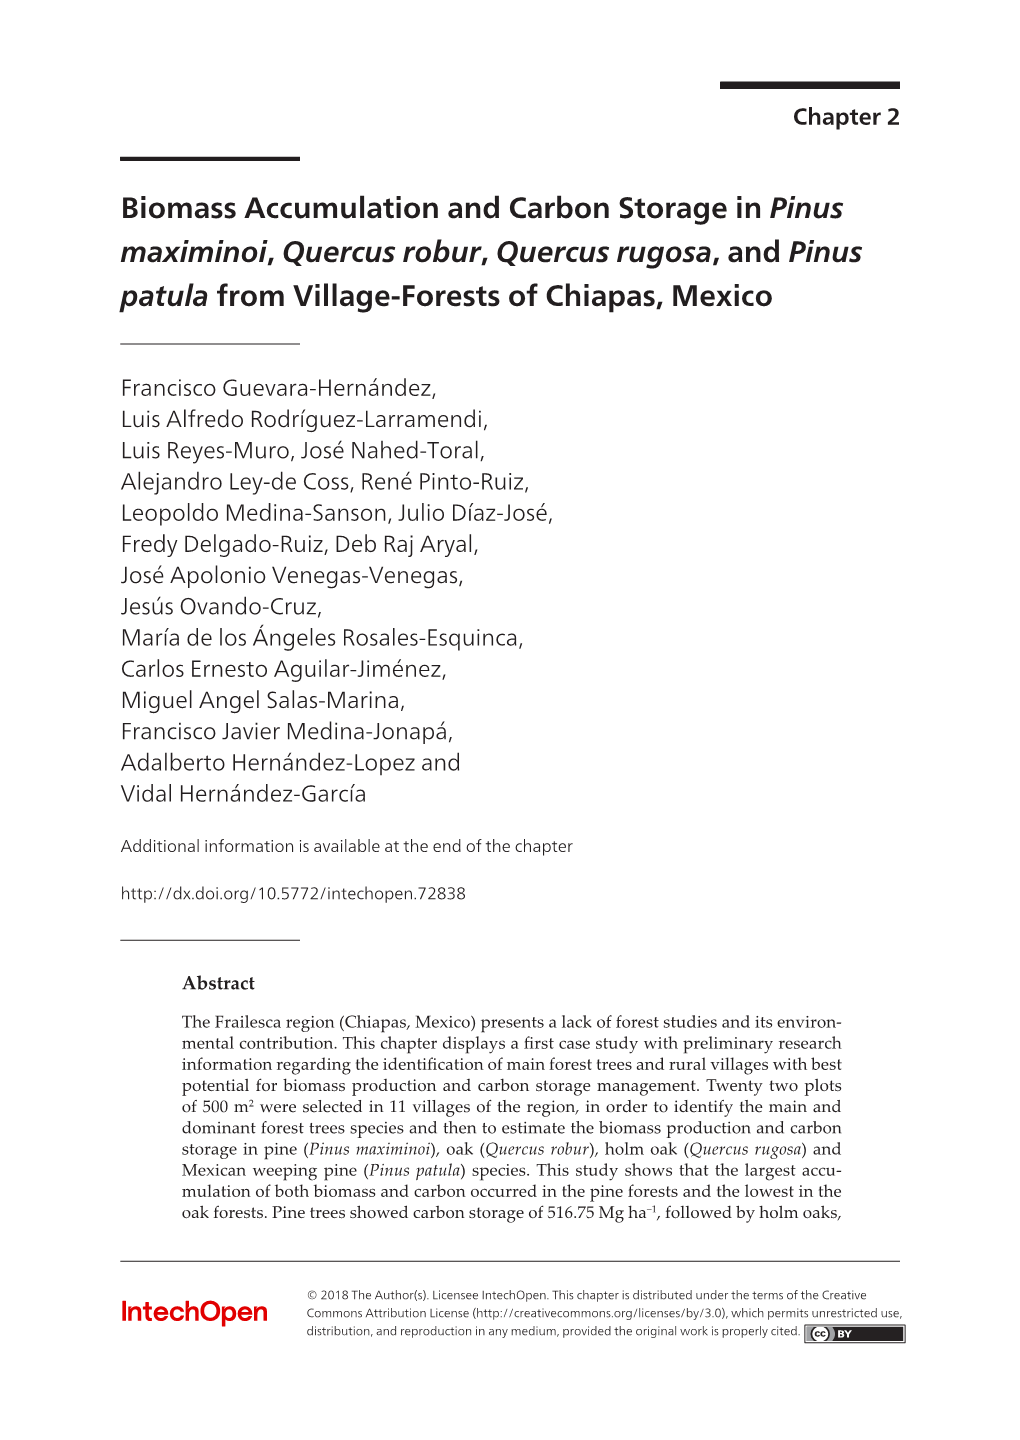 Biomass Accumulation and Carbon Storage in Pinus Maximinoi, Quercus Robur, Quercus Rugosa, and Pinus Patula from Village-Forests of Chiapas, Mexico